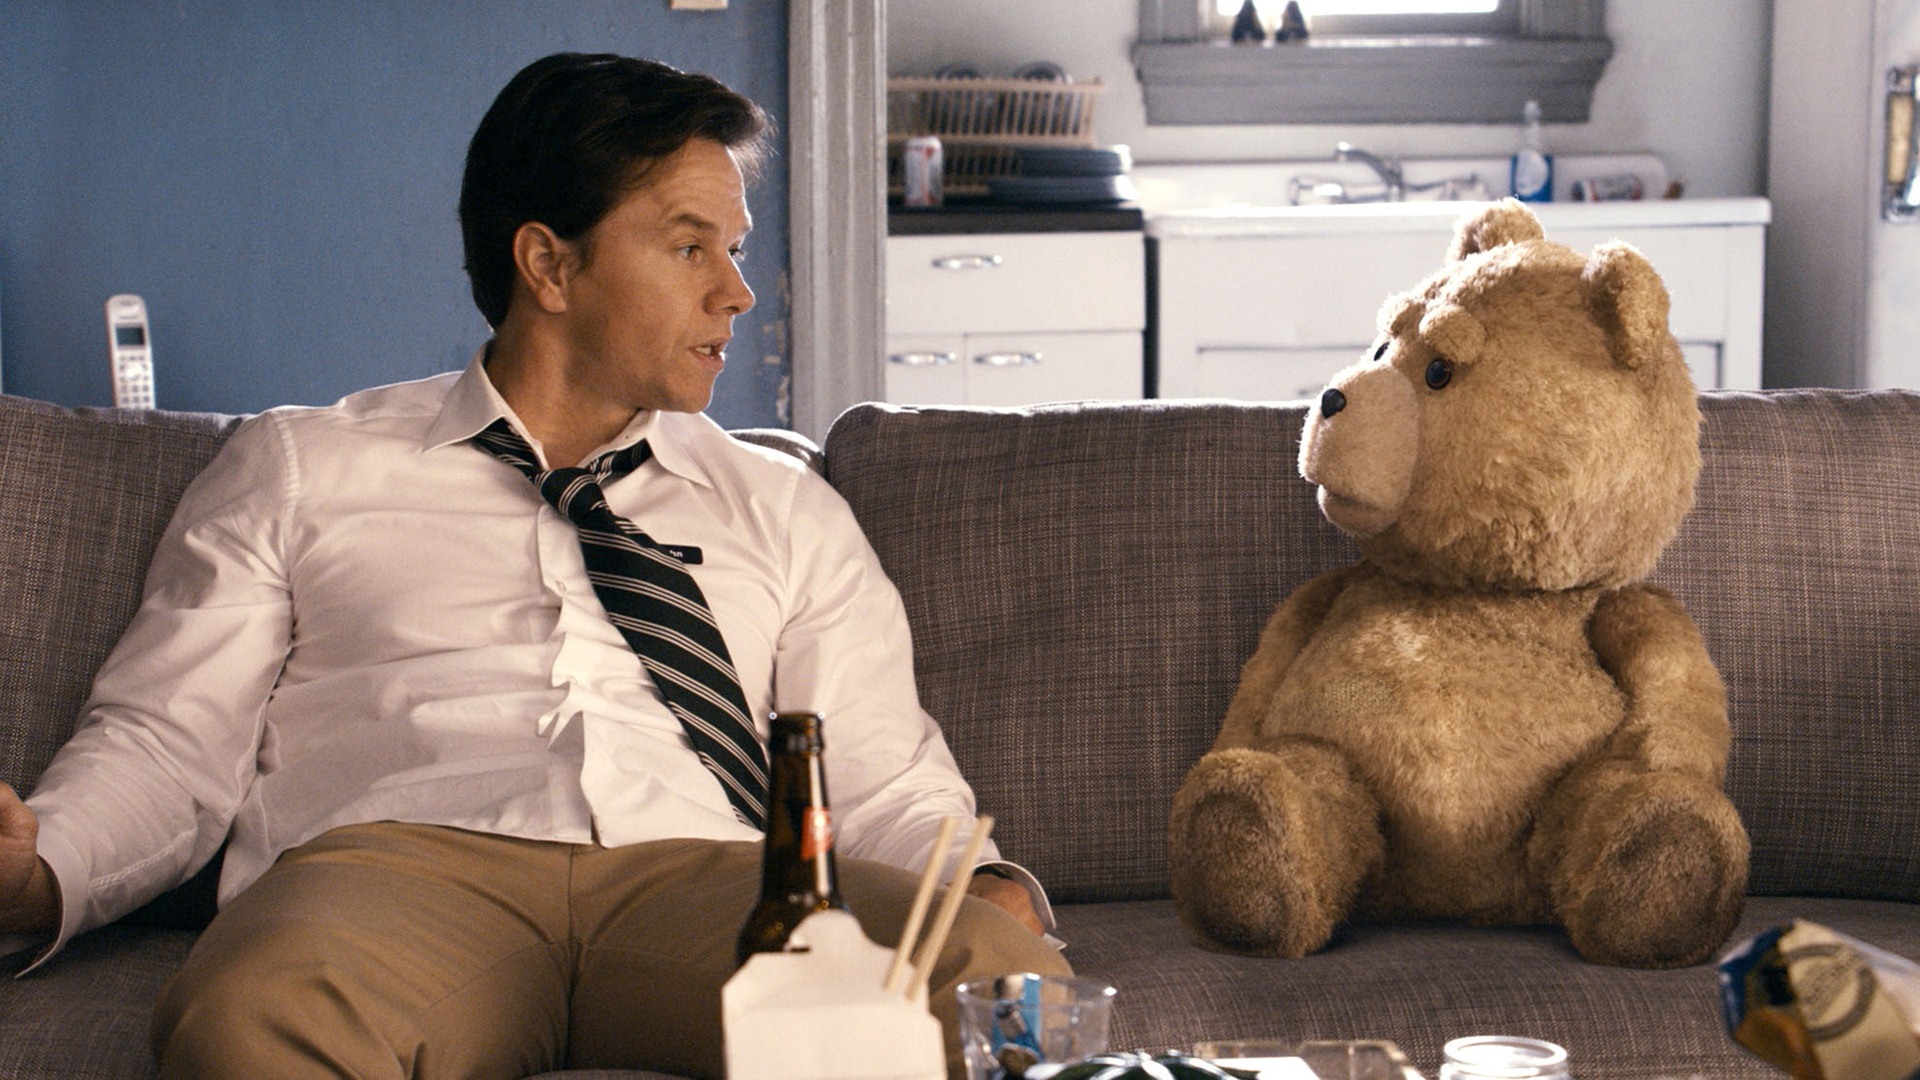 Ted 2012 HD movie wallpapers #5 - 1920x1080